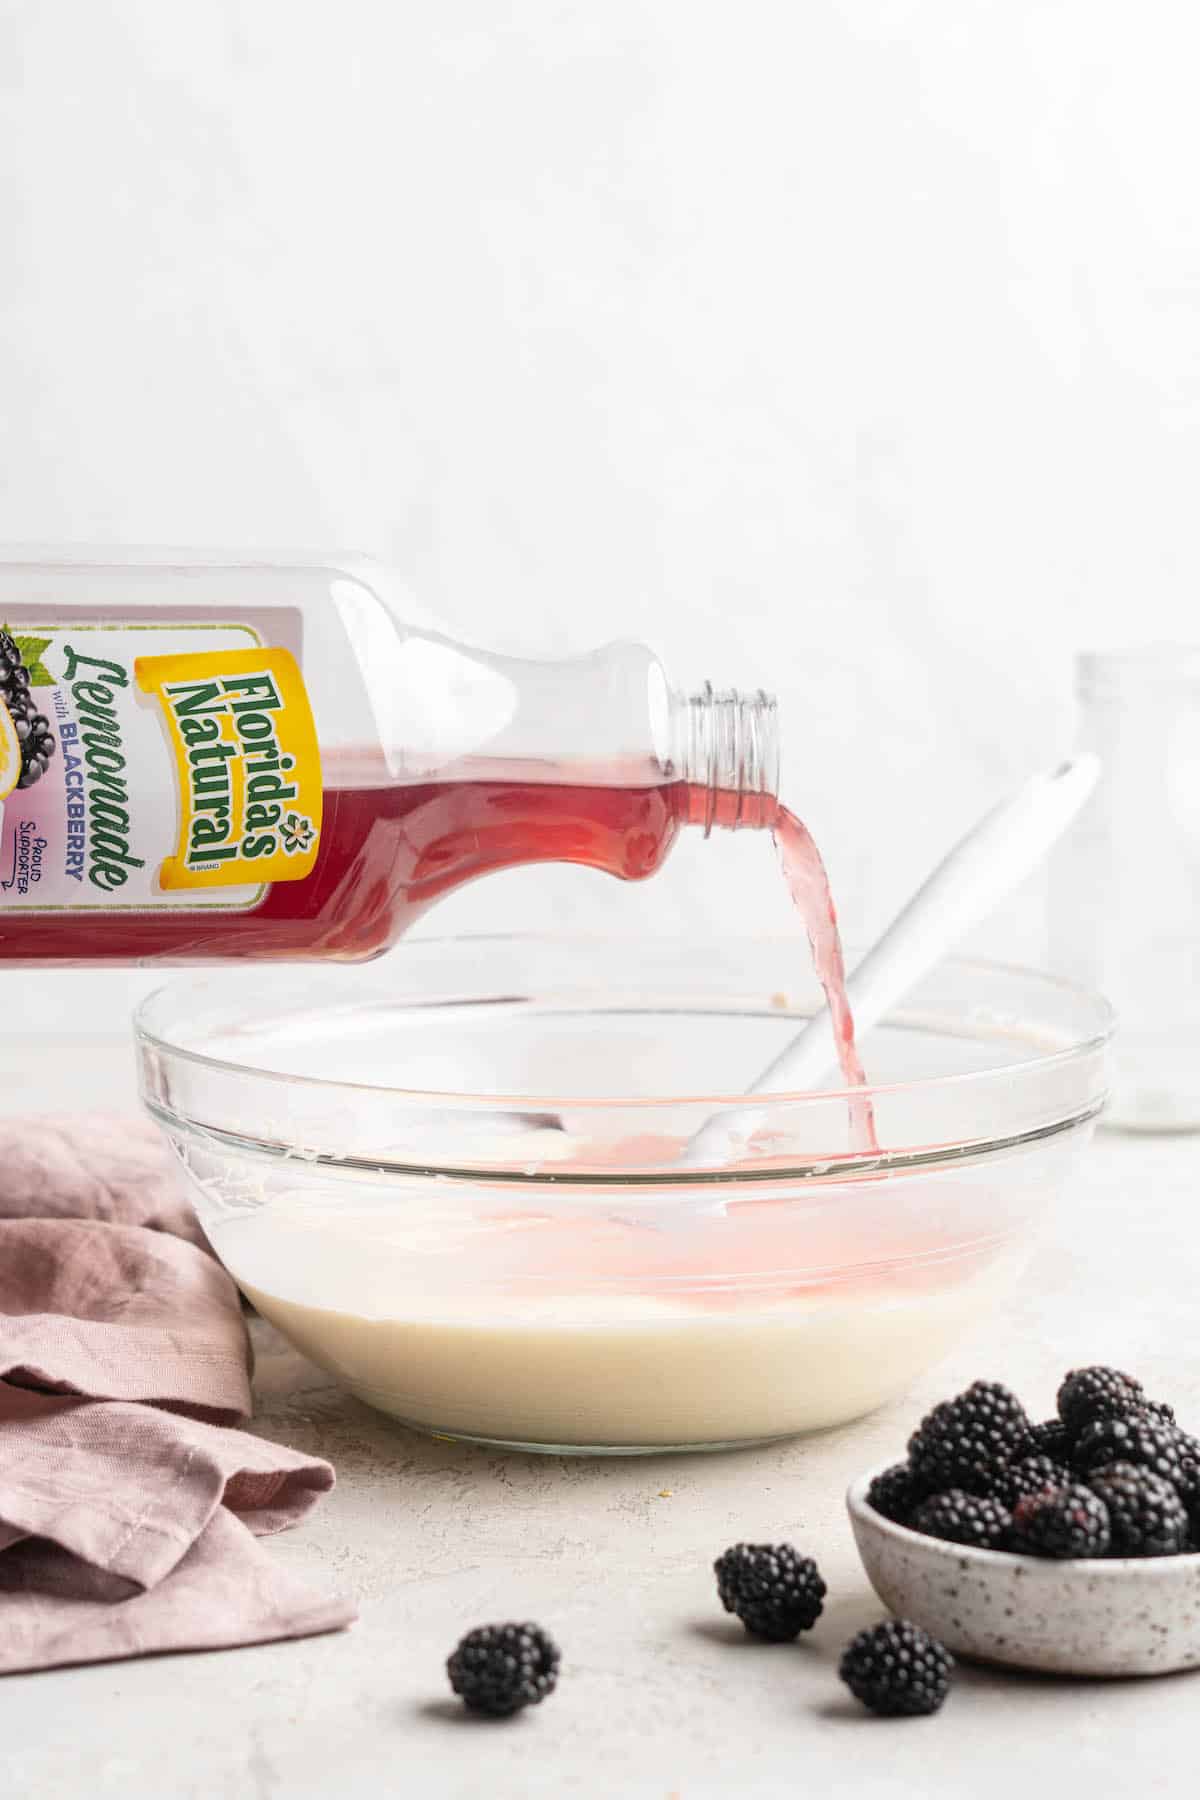 Blackberry lemonade being poured into a cream pie filling